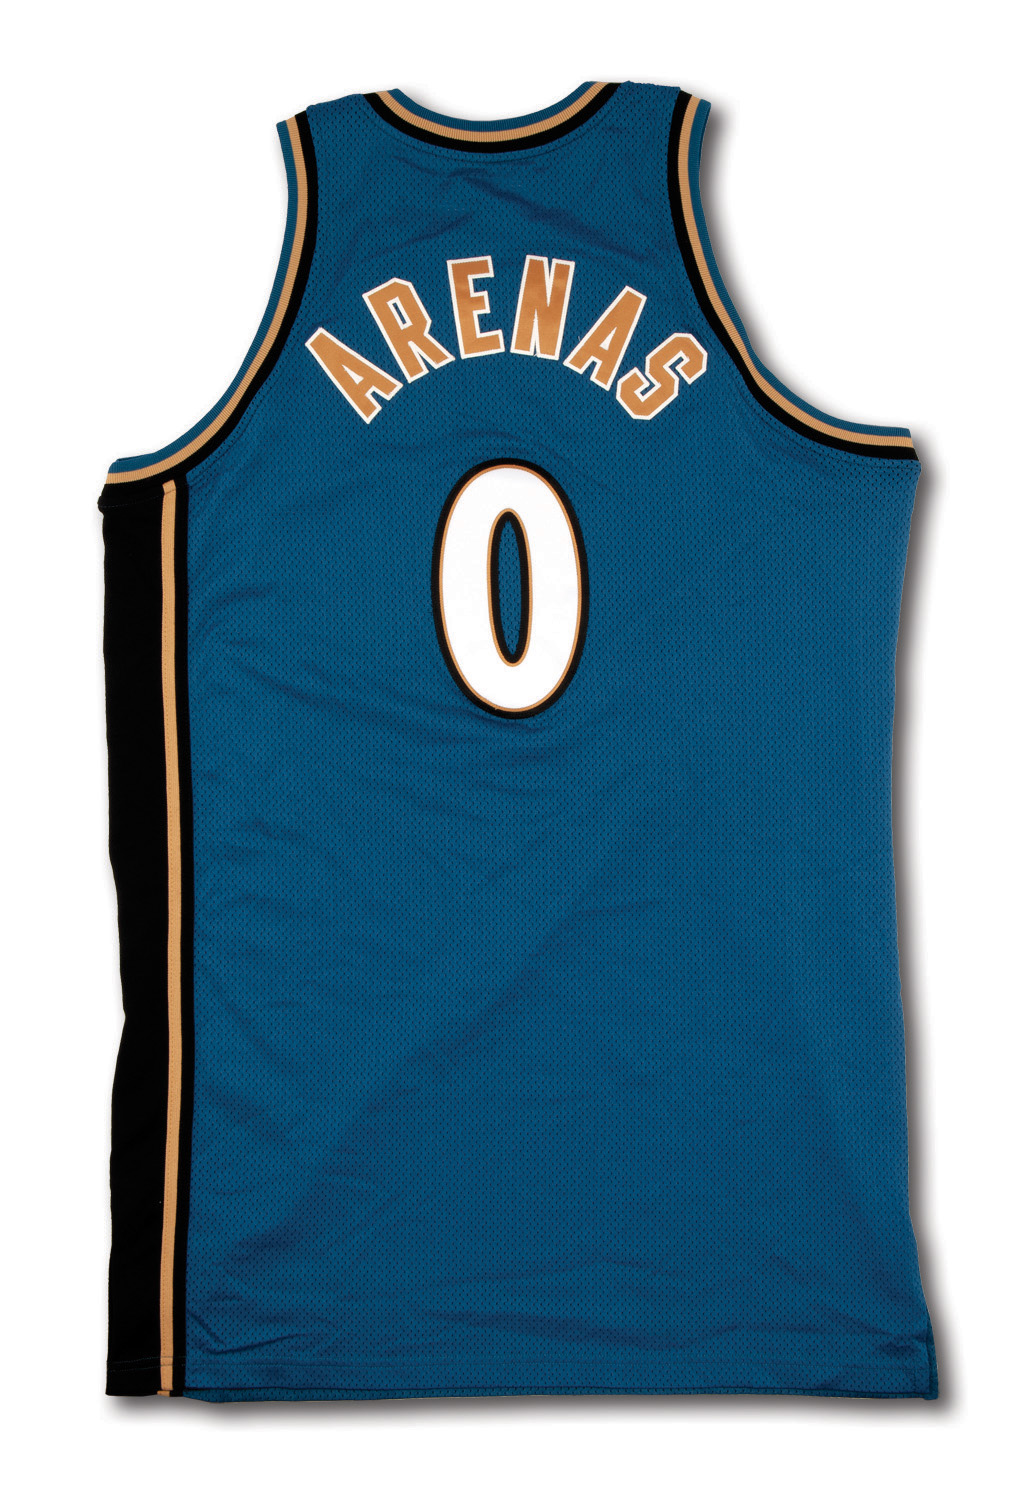 2007-08 Gilbert Arenas Game-Worn Jersey Signed Wizards Agent 0 - COA JSA  & 100% Authentic Team